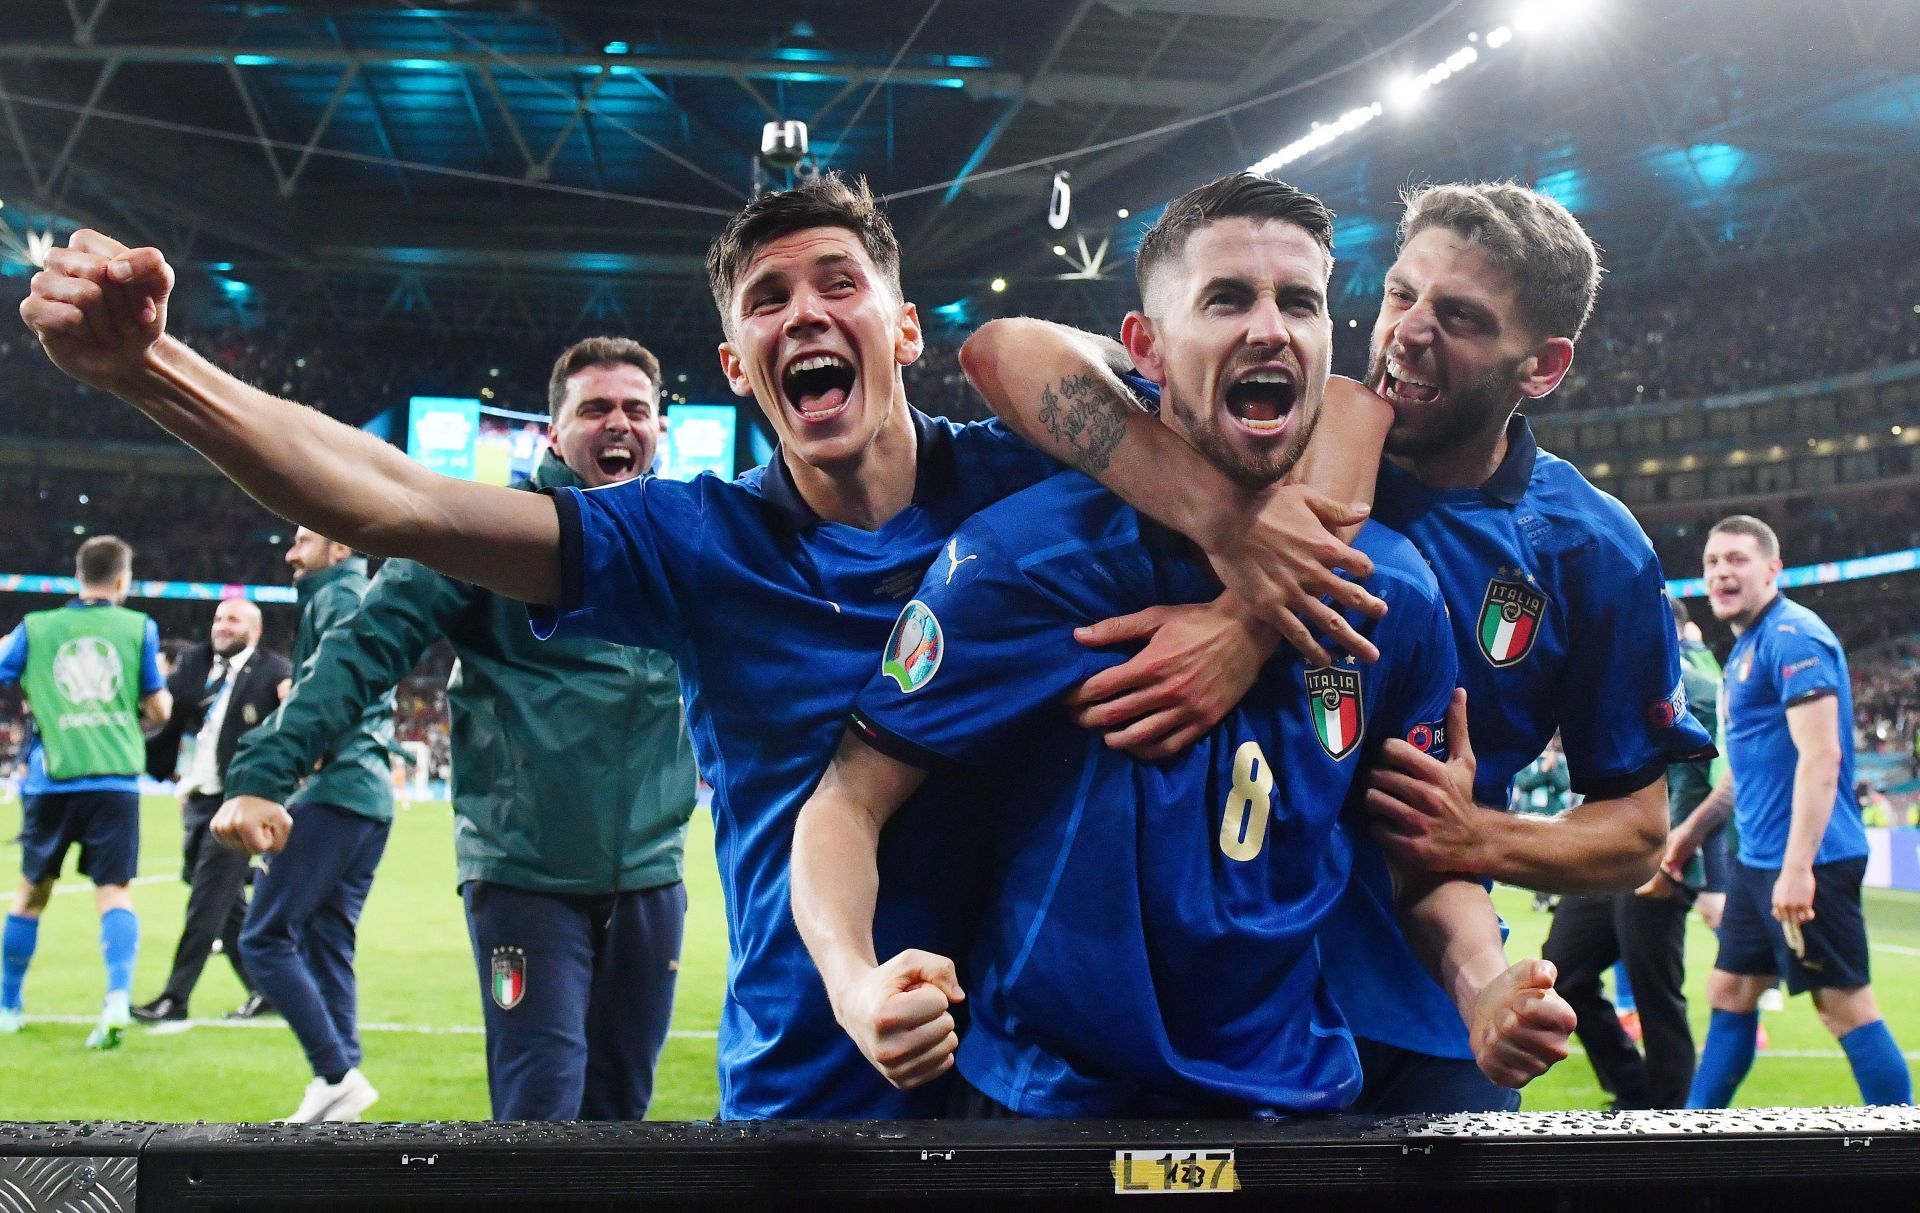 Italy players celebrate after winning a penalty shootout against Spain in the semi-final of Euro 2020